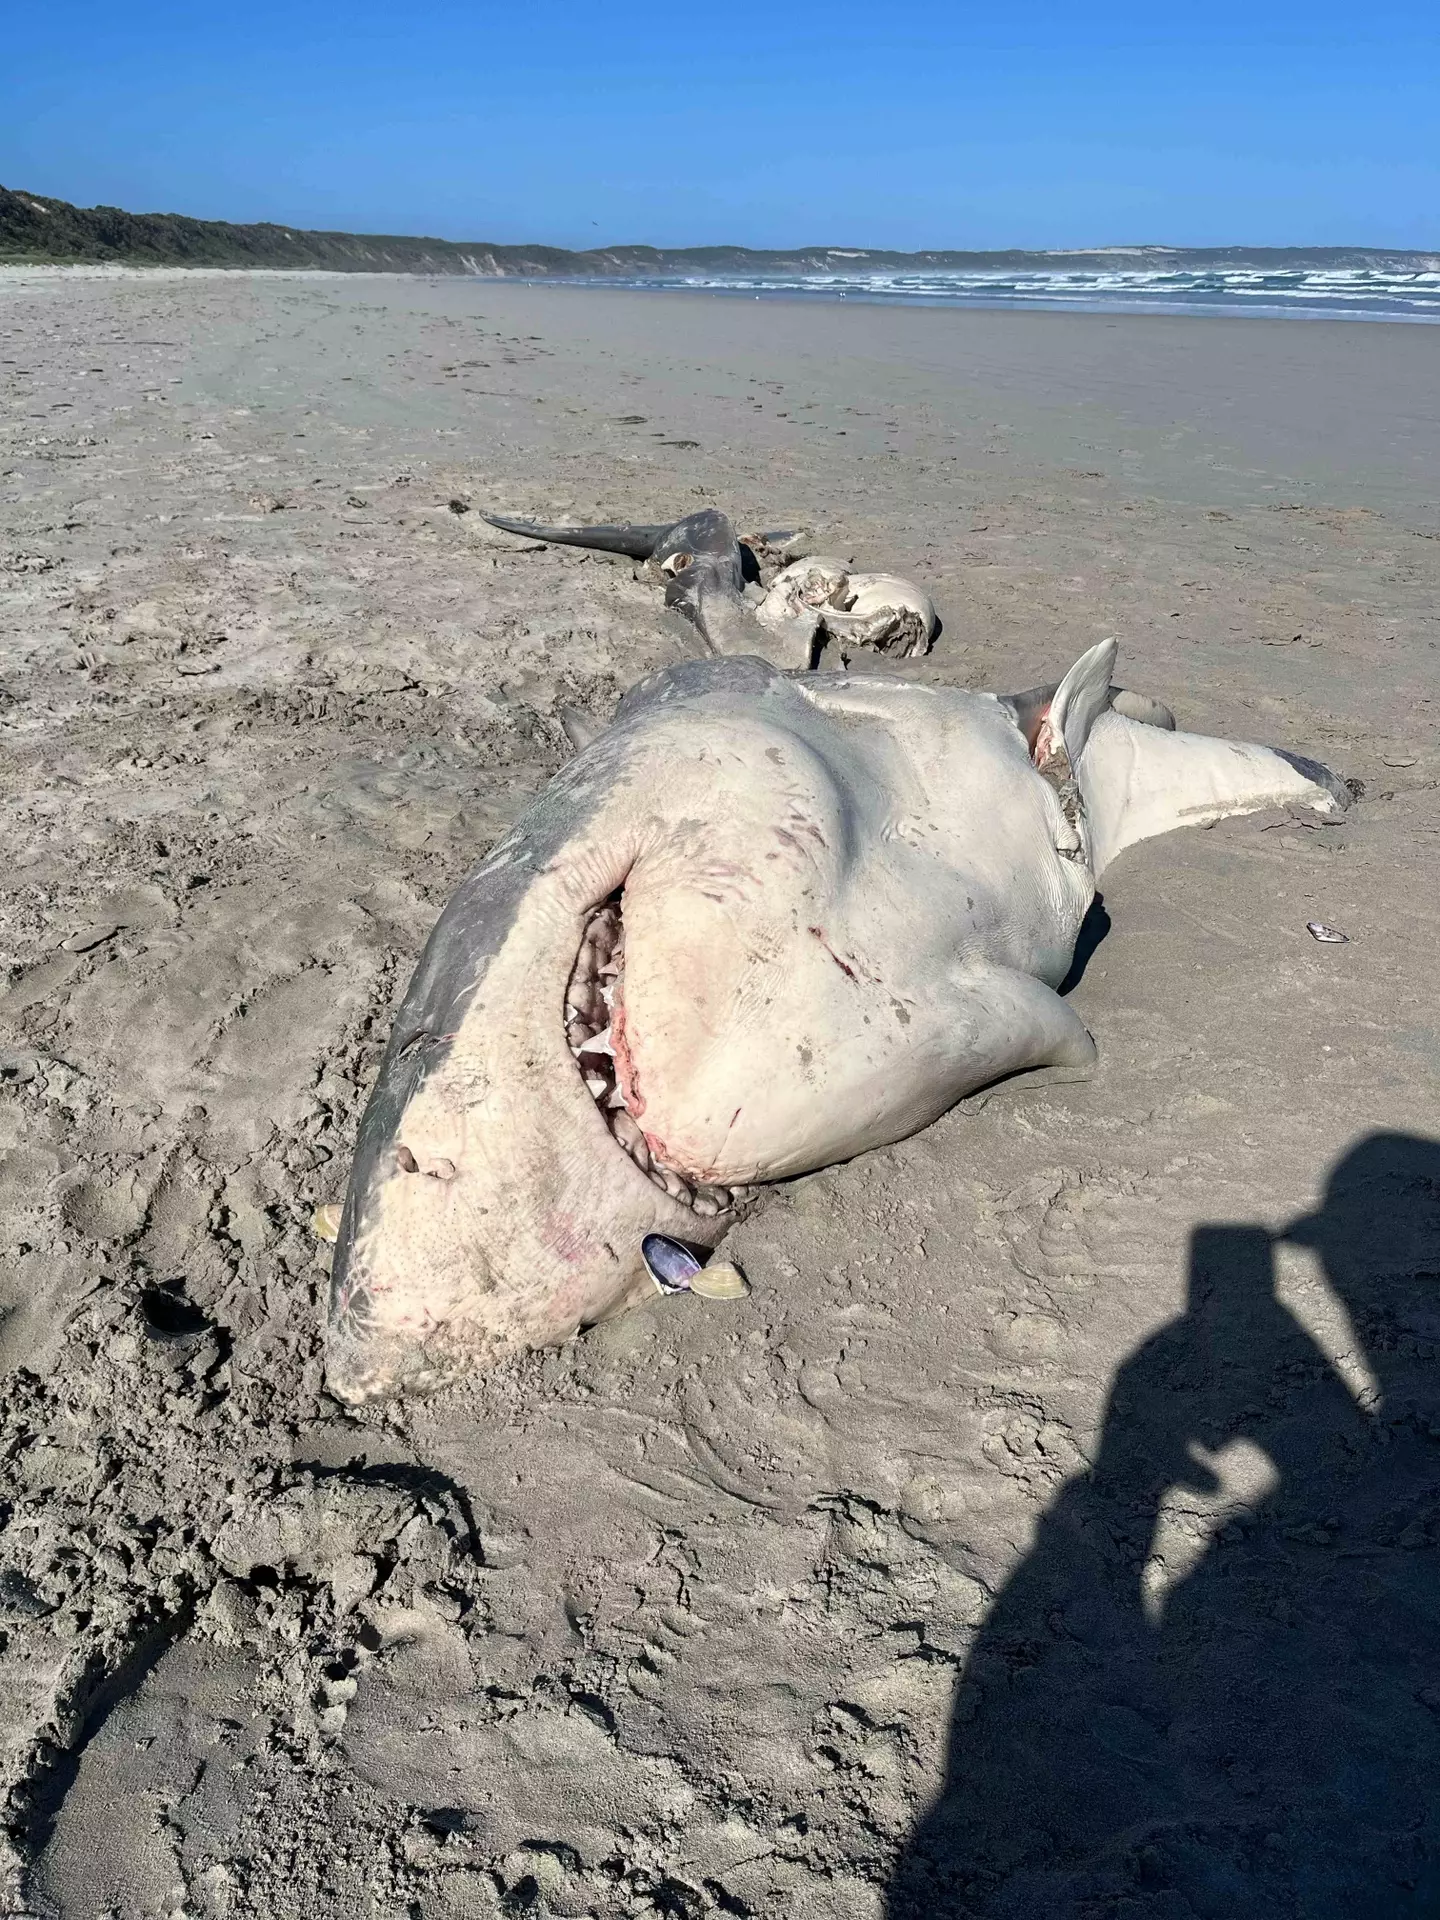 Not much was left of the unfortunate shark.